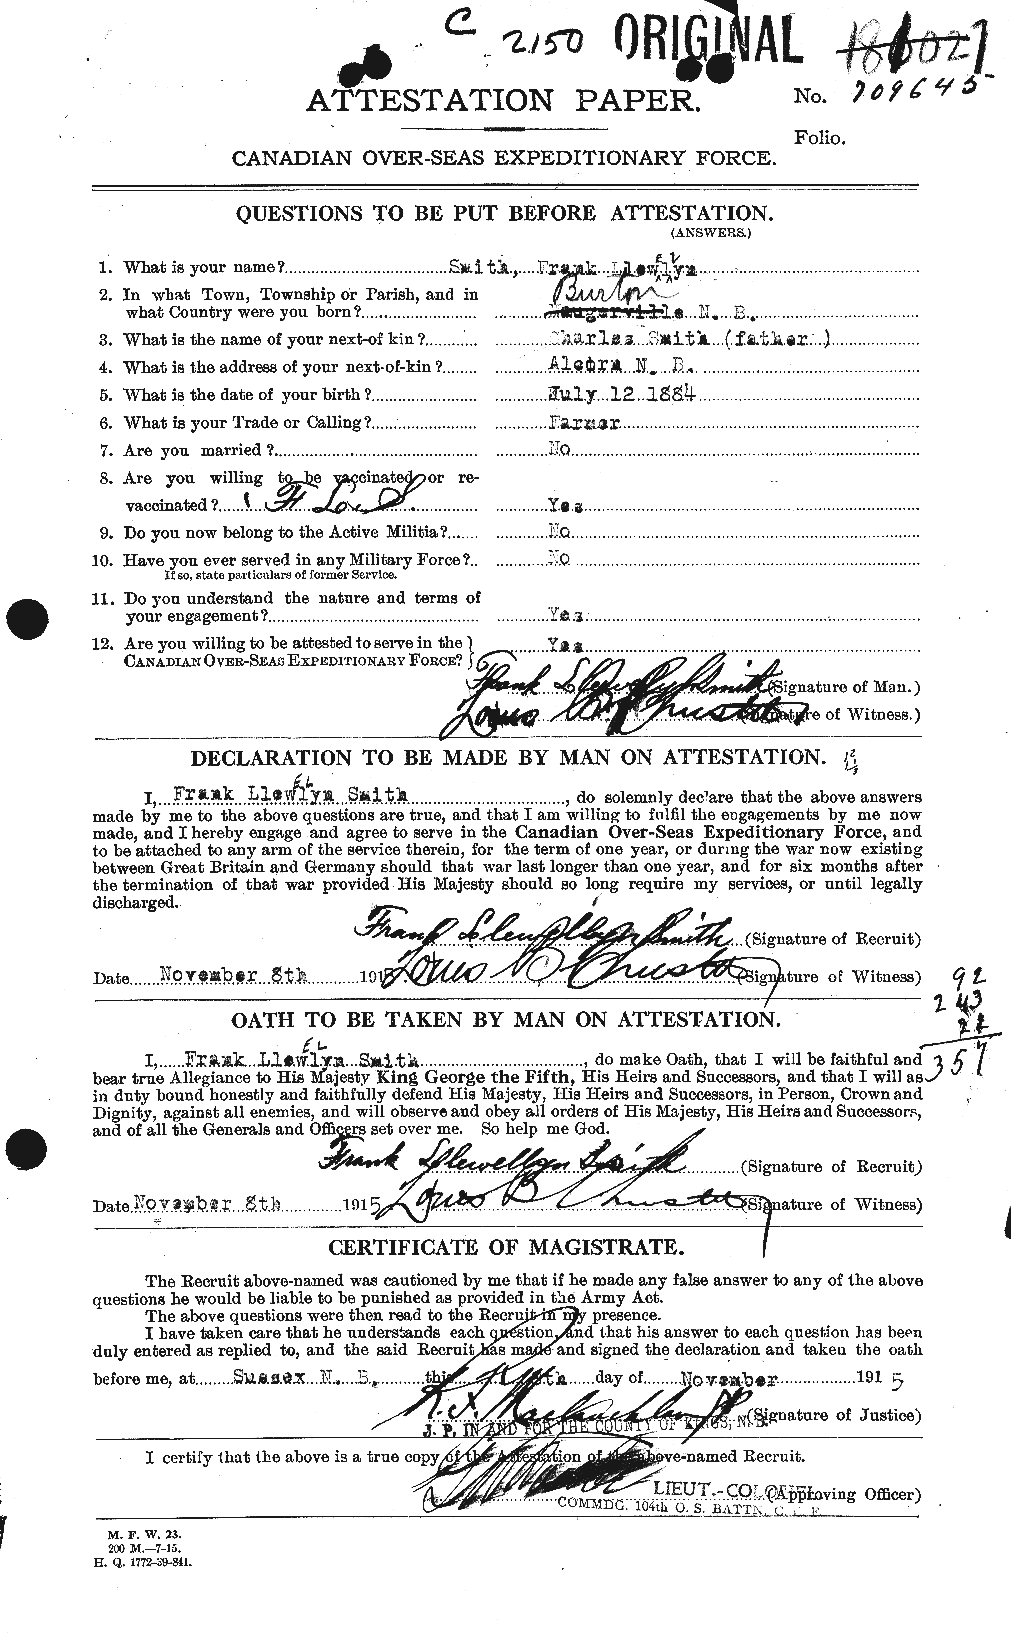 Personnel Records of the First World War - CEF 106581a